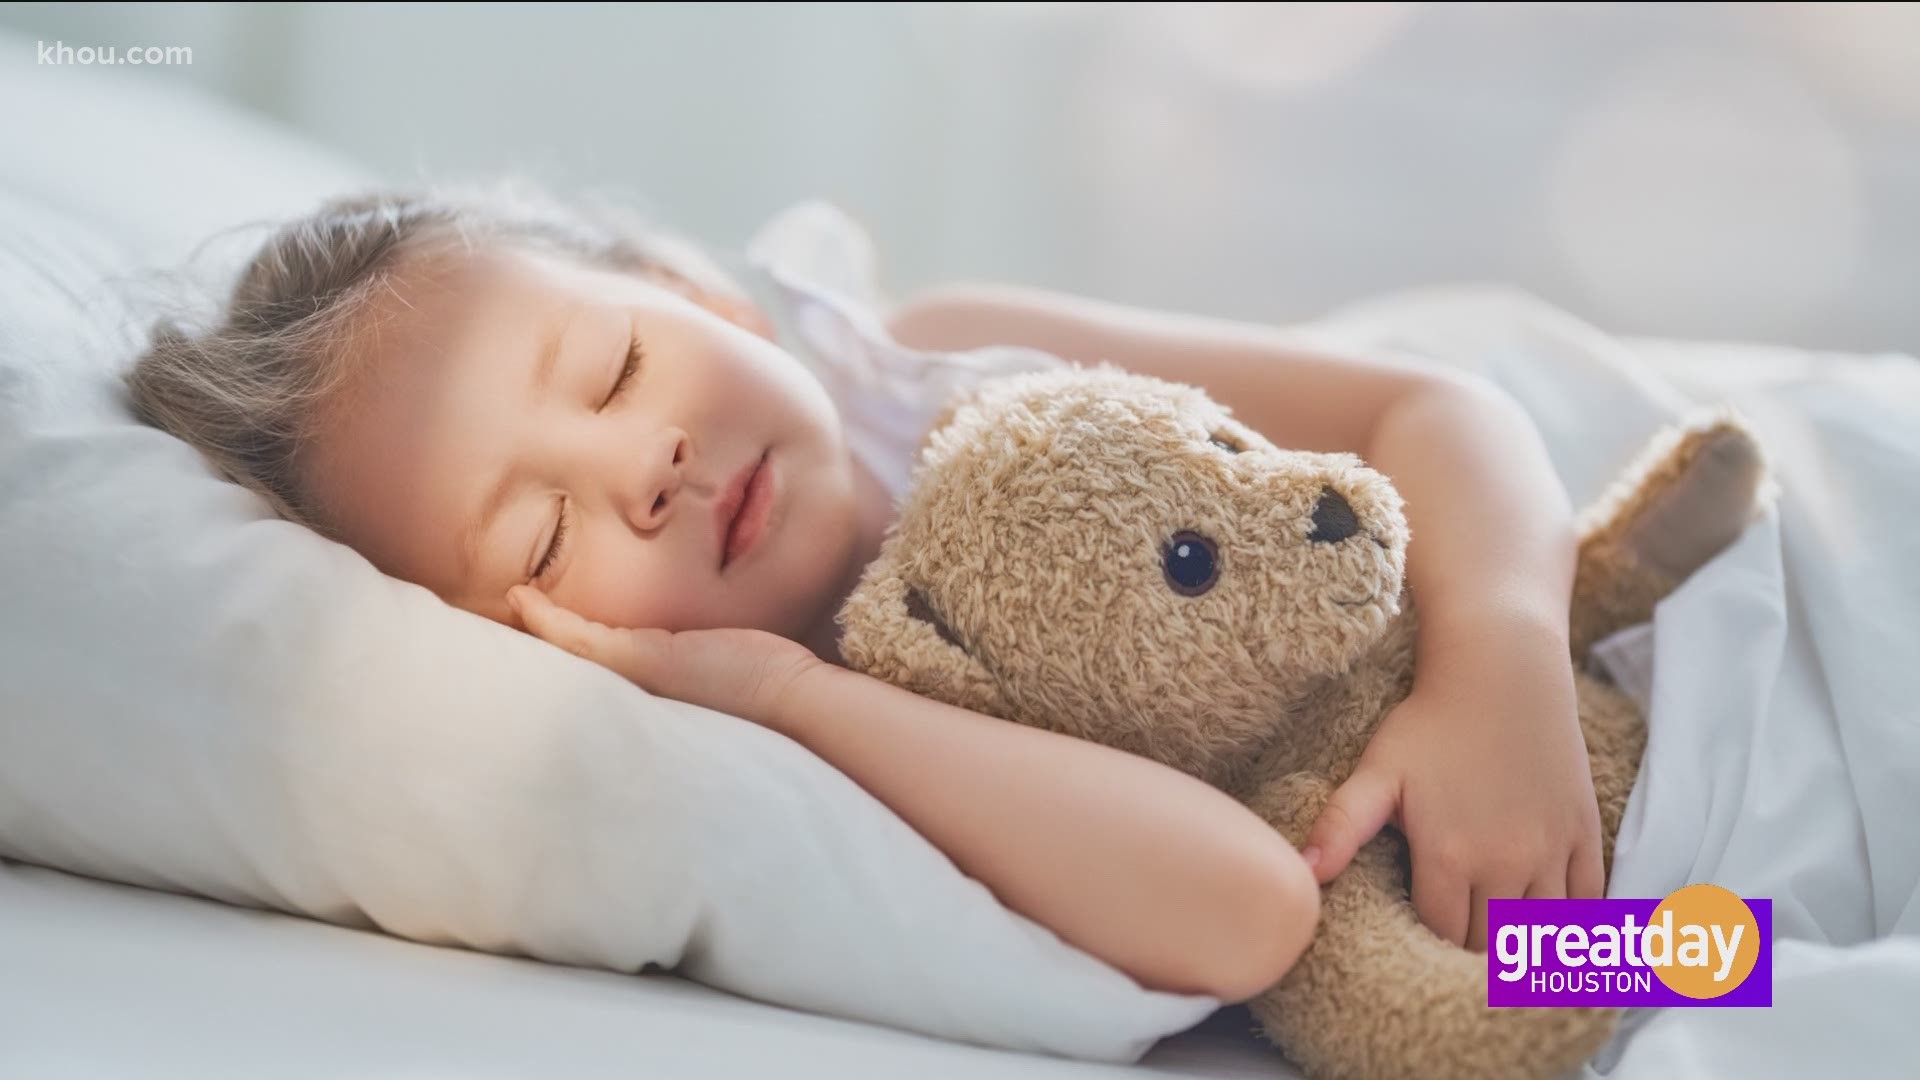 At Texas Mattress Makers, it's what's inside that count. Youval Meicler describes the components you need in your bed to get a good night's sleep.